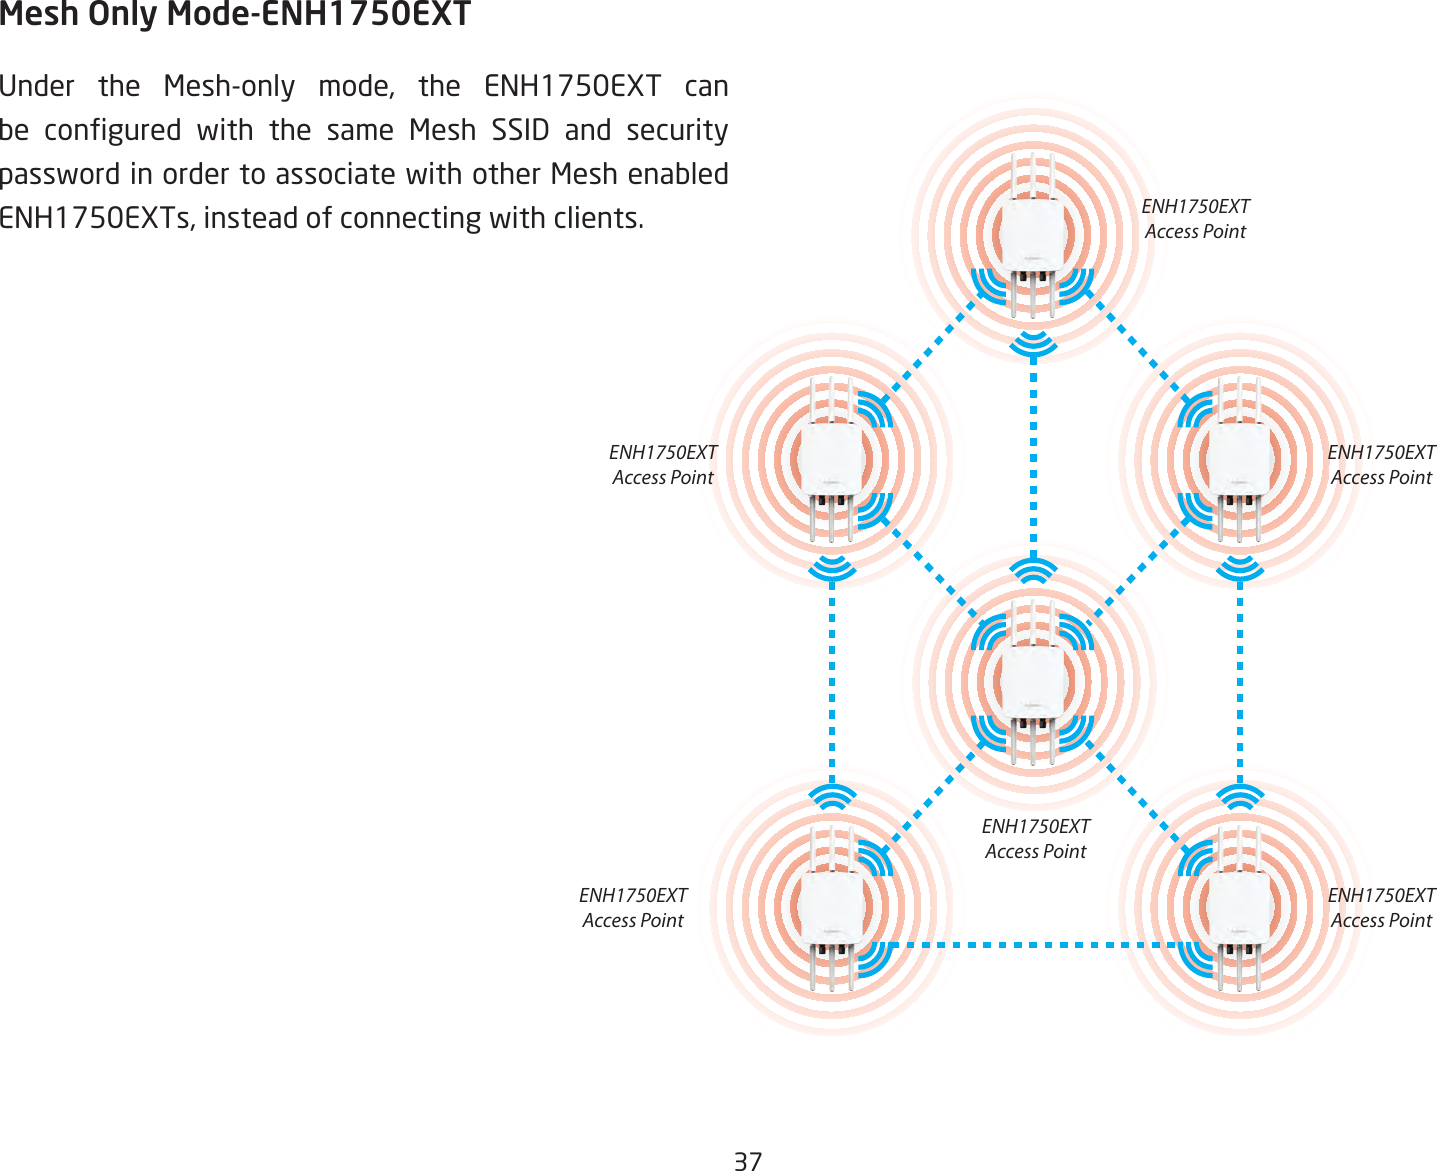 37Under  the  Mesh-only  mode,  the  ENH1750EXT  can be  congured  with  the  same  Mesh  SSID  and  security password in order to associate with other Mesh enabled ENH1750EXTs, instead of connecting with clients.Mesh Only Mode-ENH1750EXTENH1750EXTAccess PointENH1750EXTAccess PointENH1750EXTAccess PointENH1750EXTAccess PointENH1750EXTAccess PointENH1750EXTAccess Point